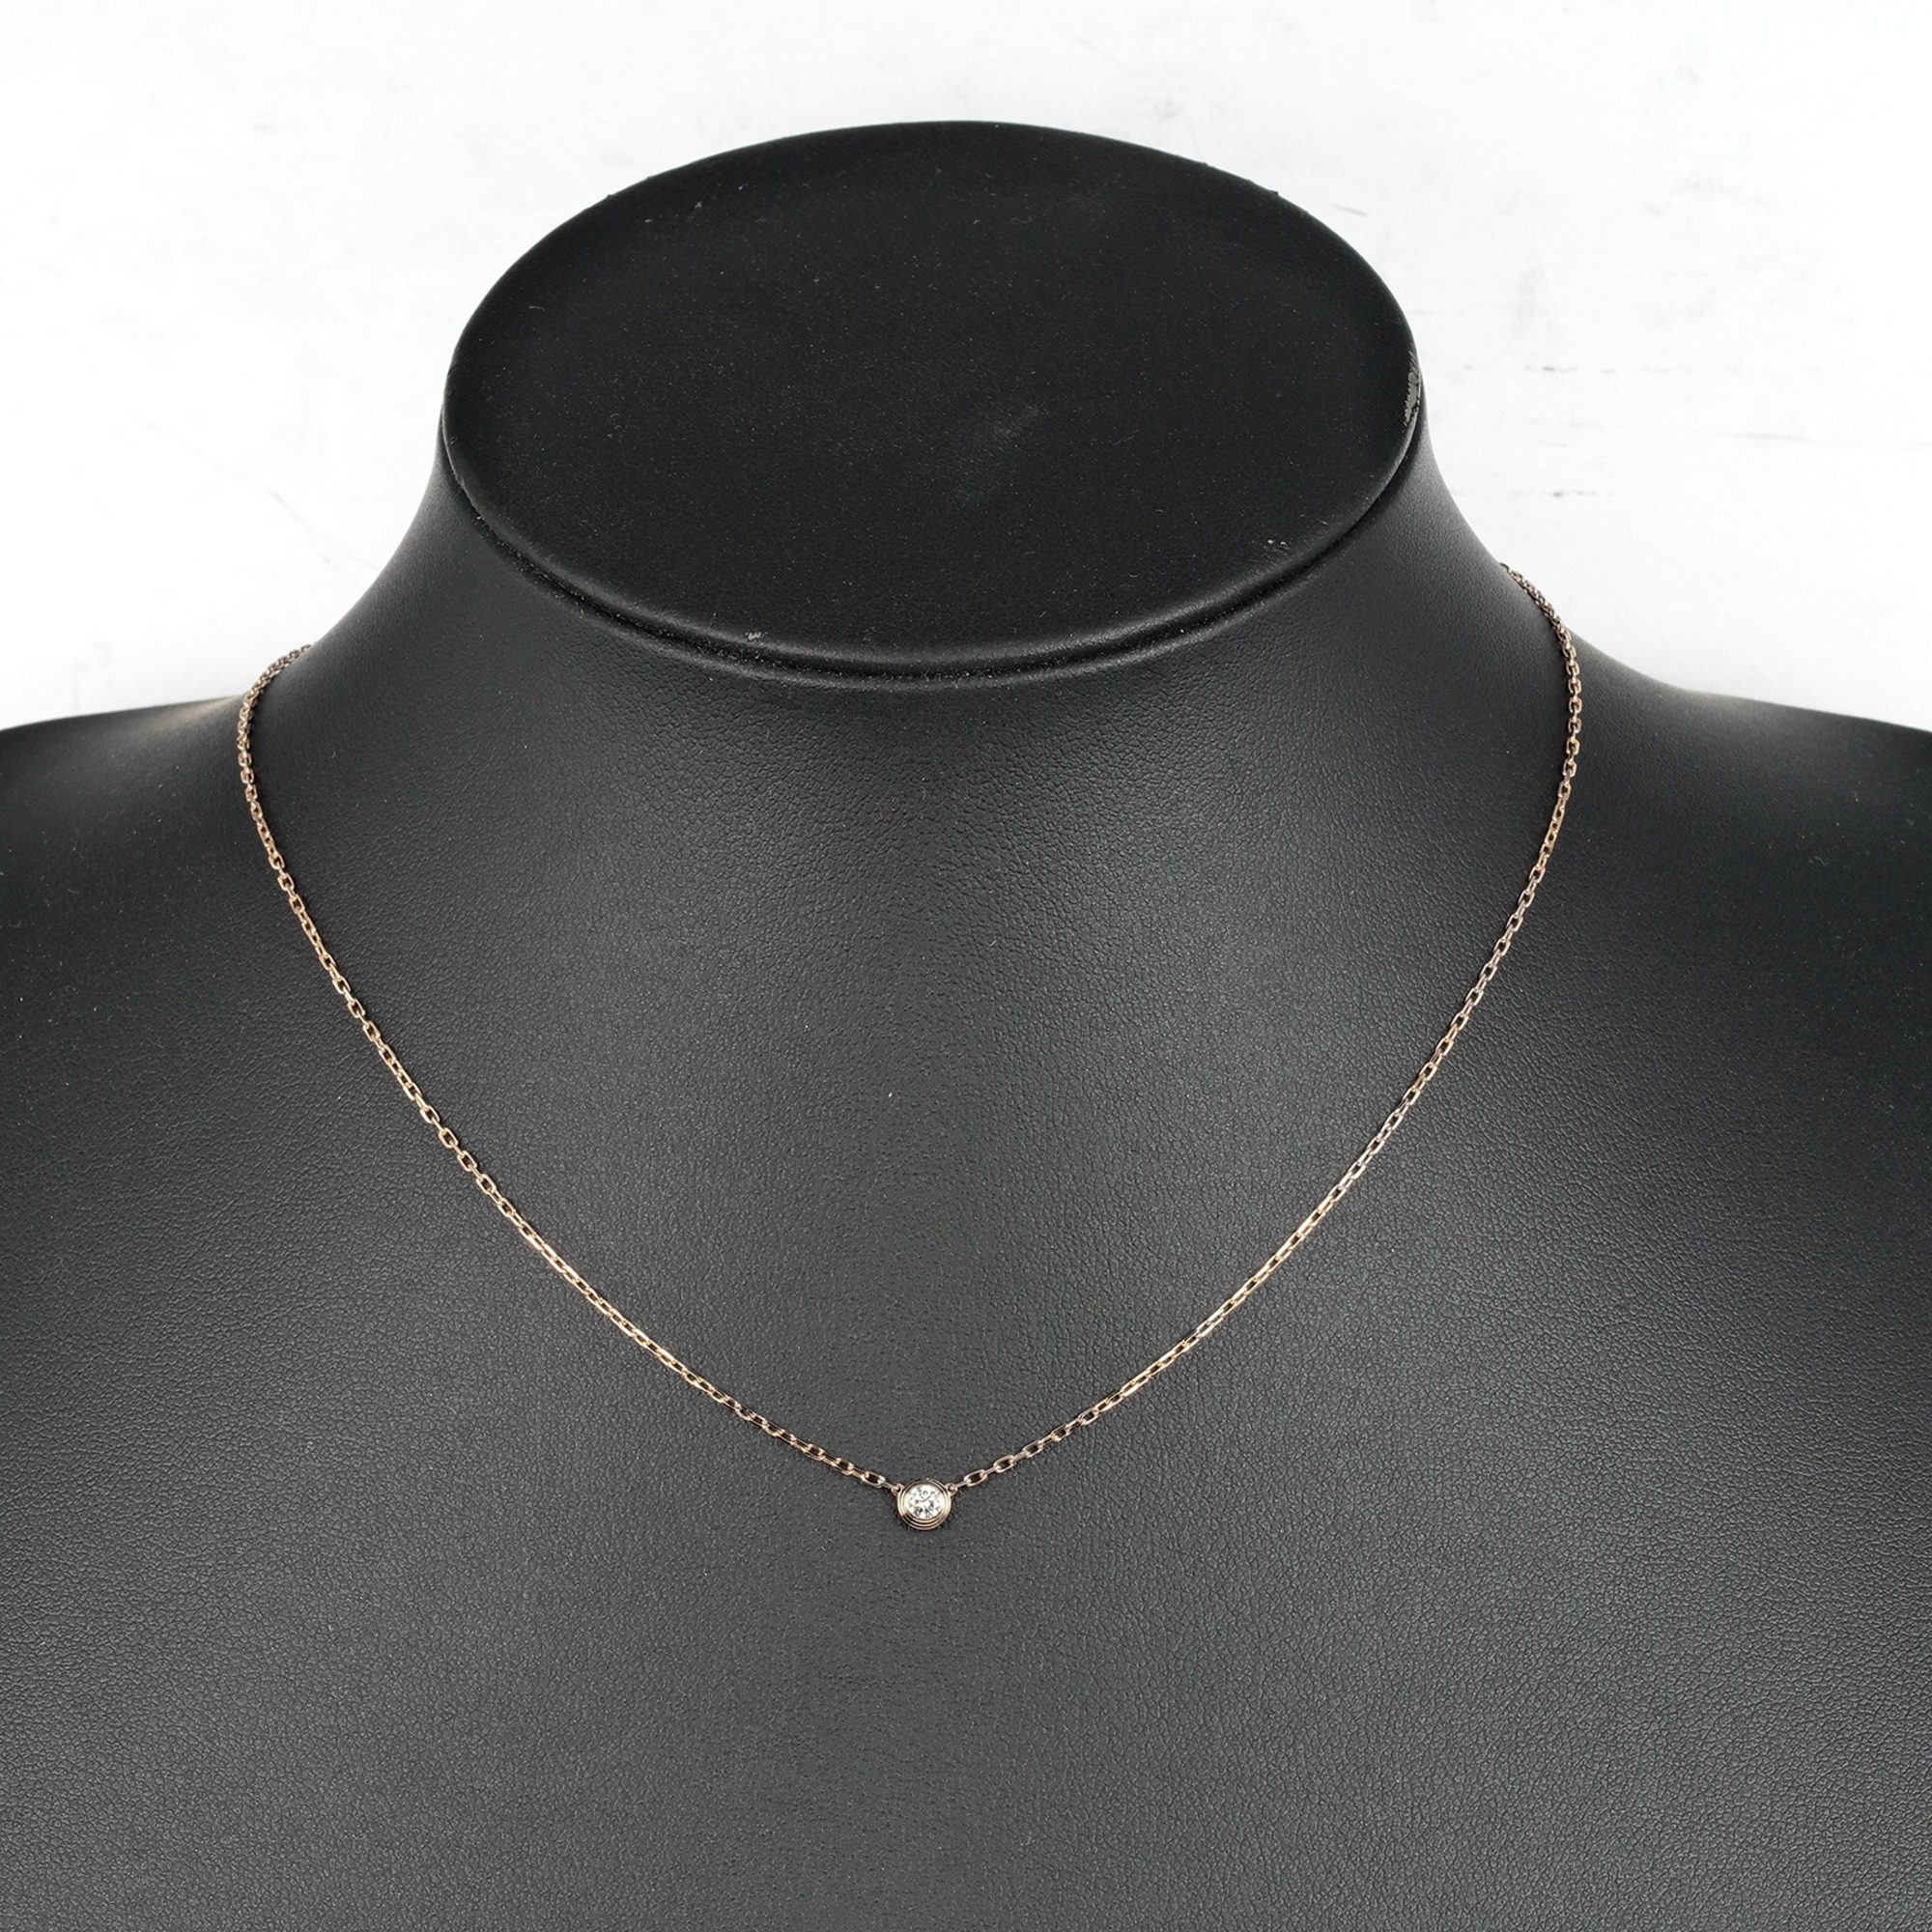 Cartier Amour Diamant Léger Small Model Necklace K18PG Pink Gold Diamond Approx. 2.86g